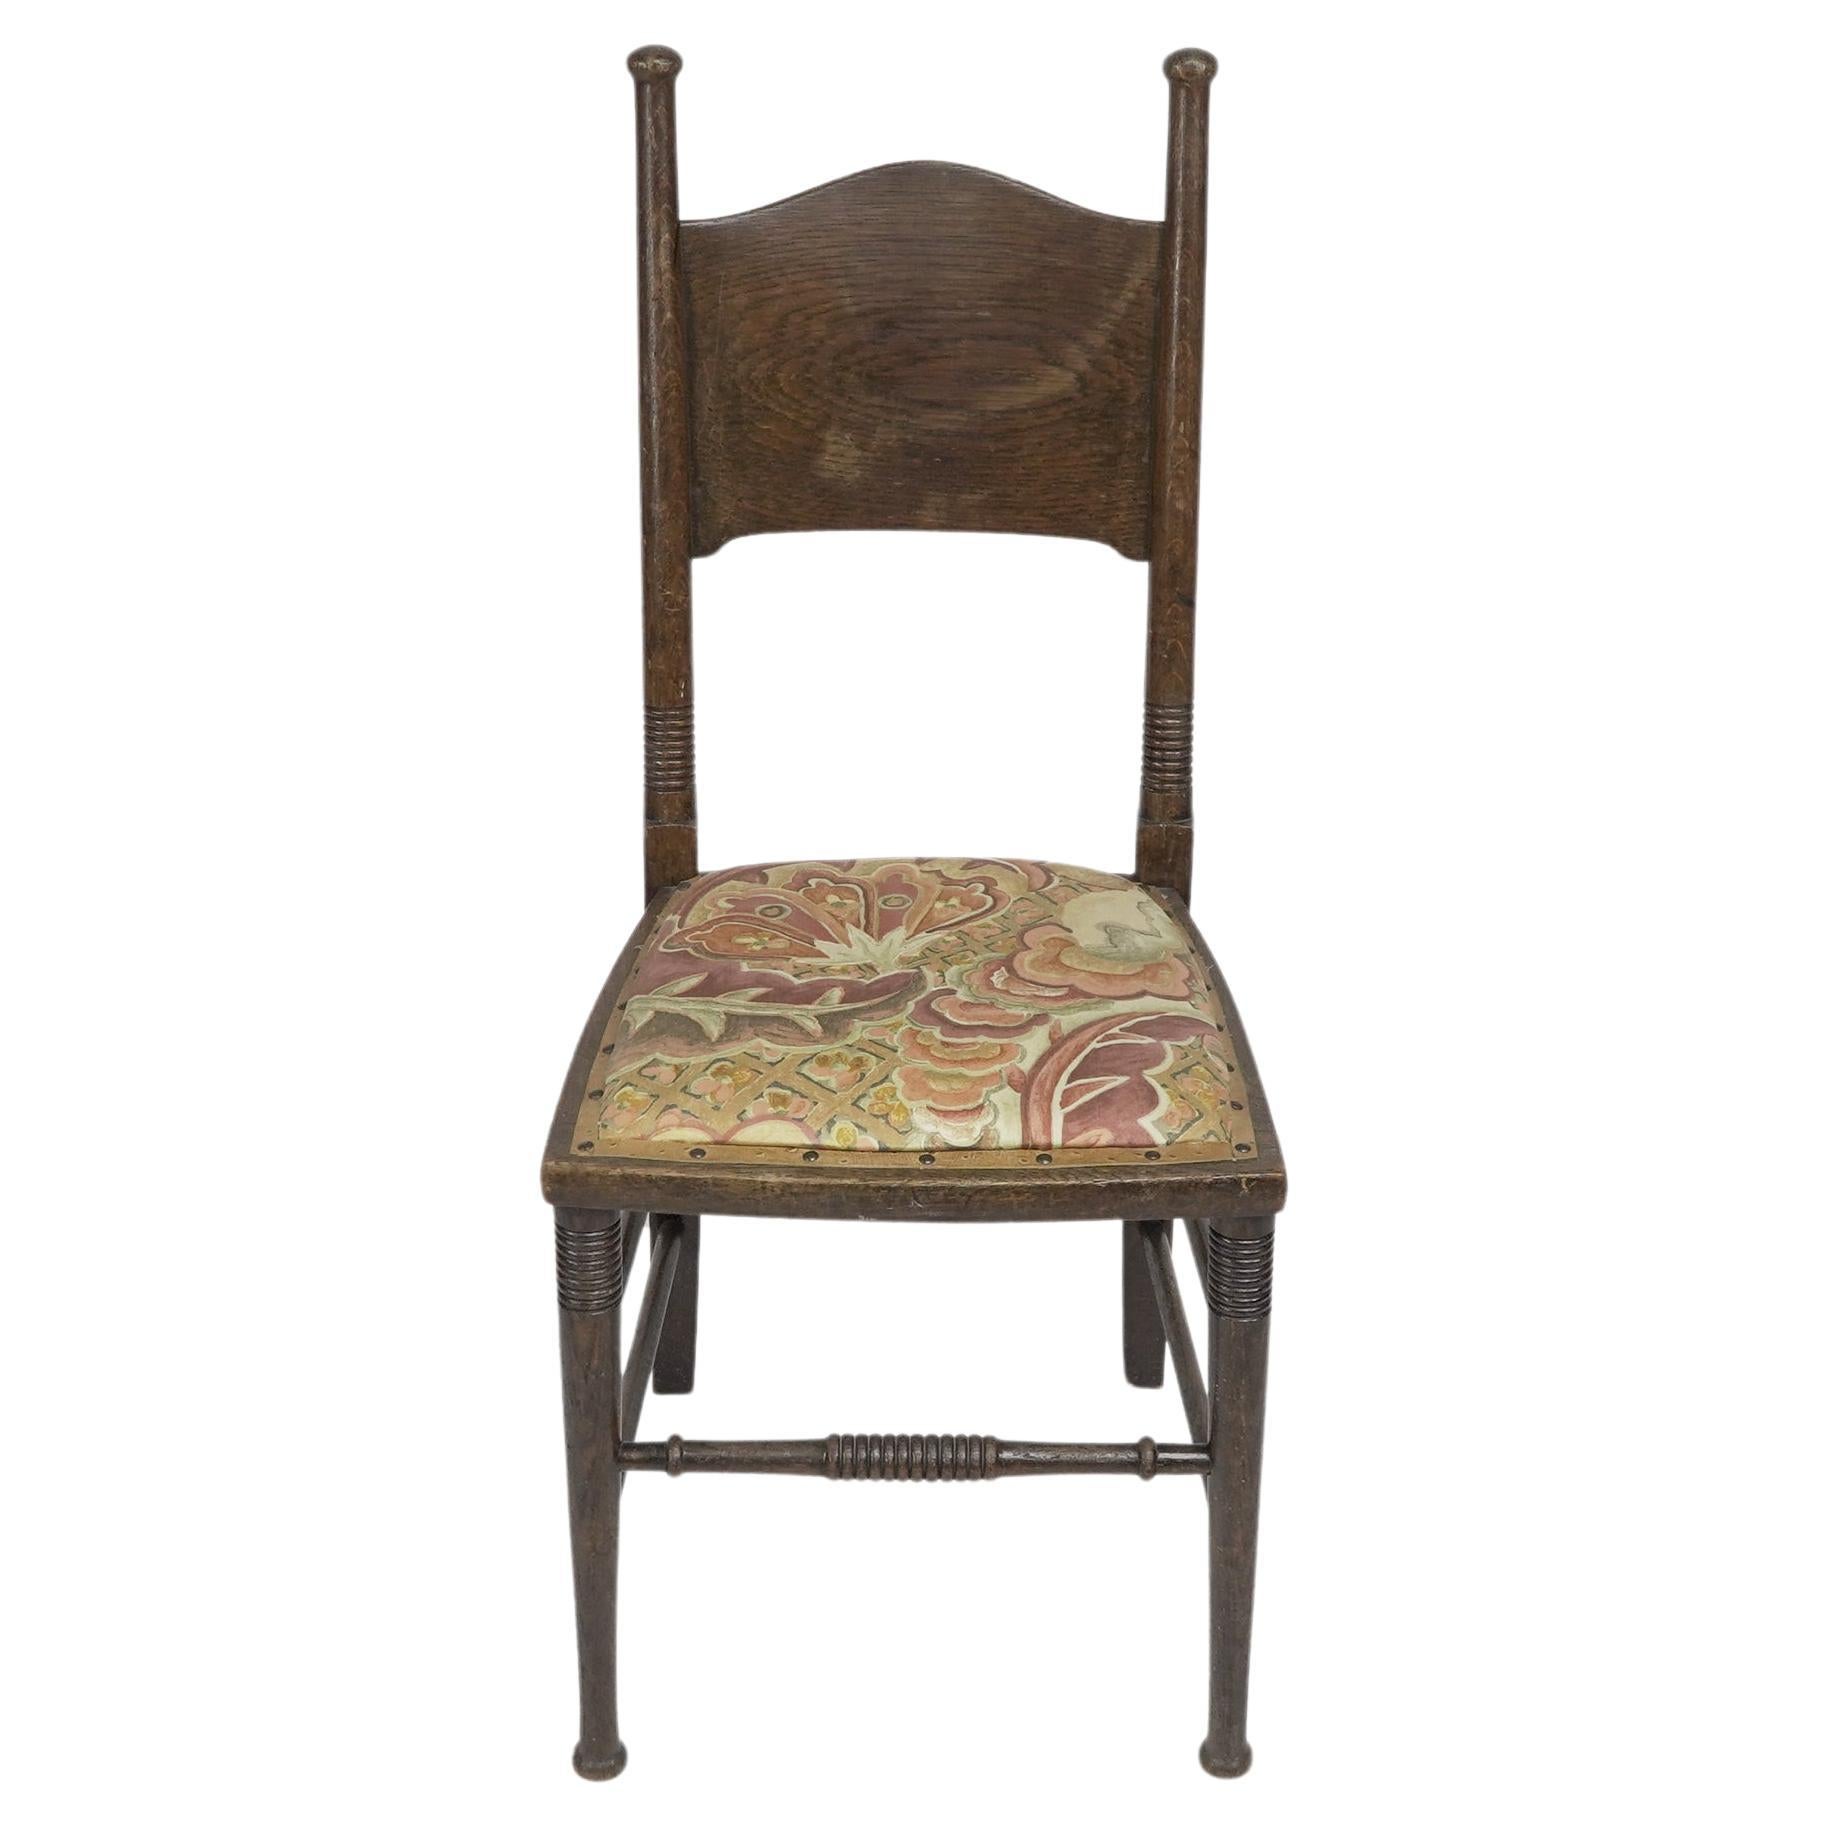 William Birch. An Arts and Crafts Oak upholstered chair For Sale